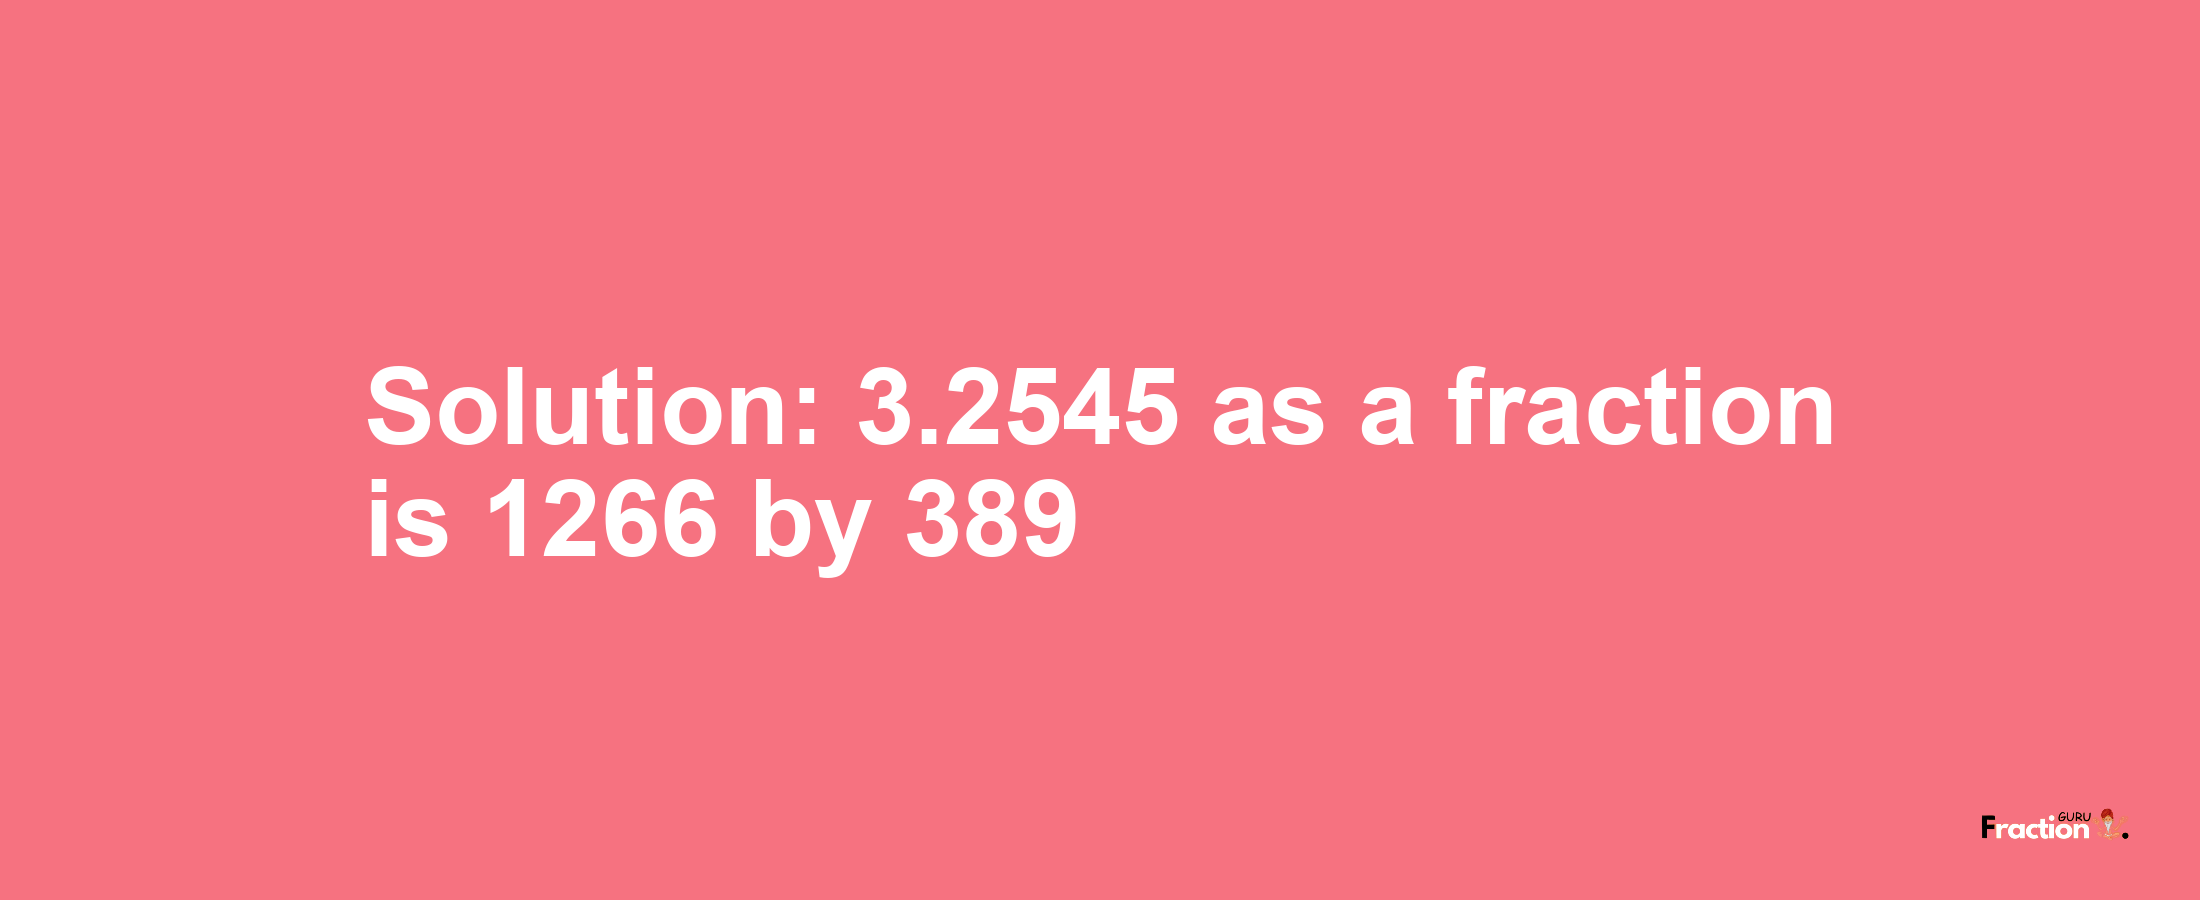 Solution:3.2545 as a fraction is 1266/389